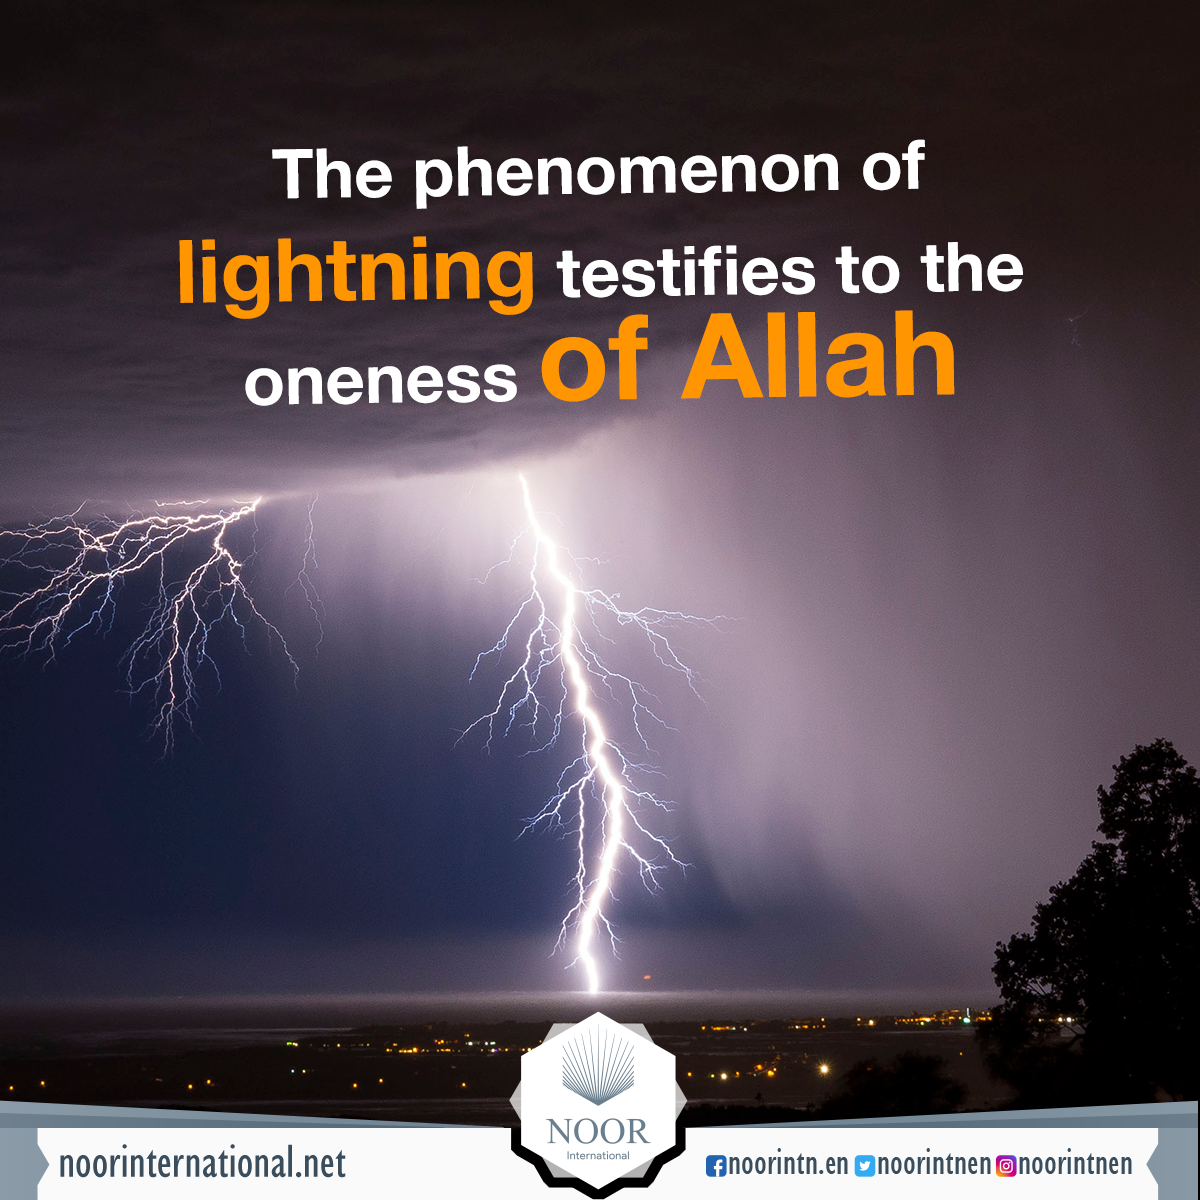 The phenomenon of lightning testifies to the oneness of Allah